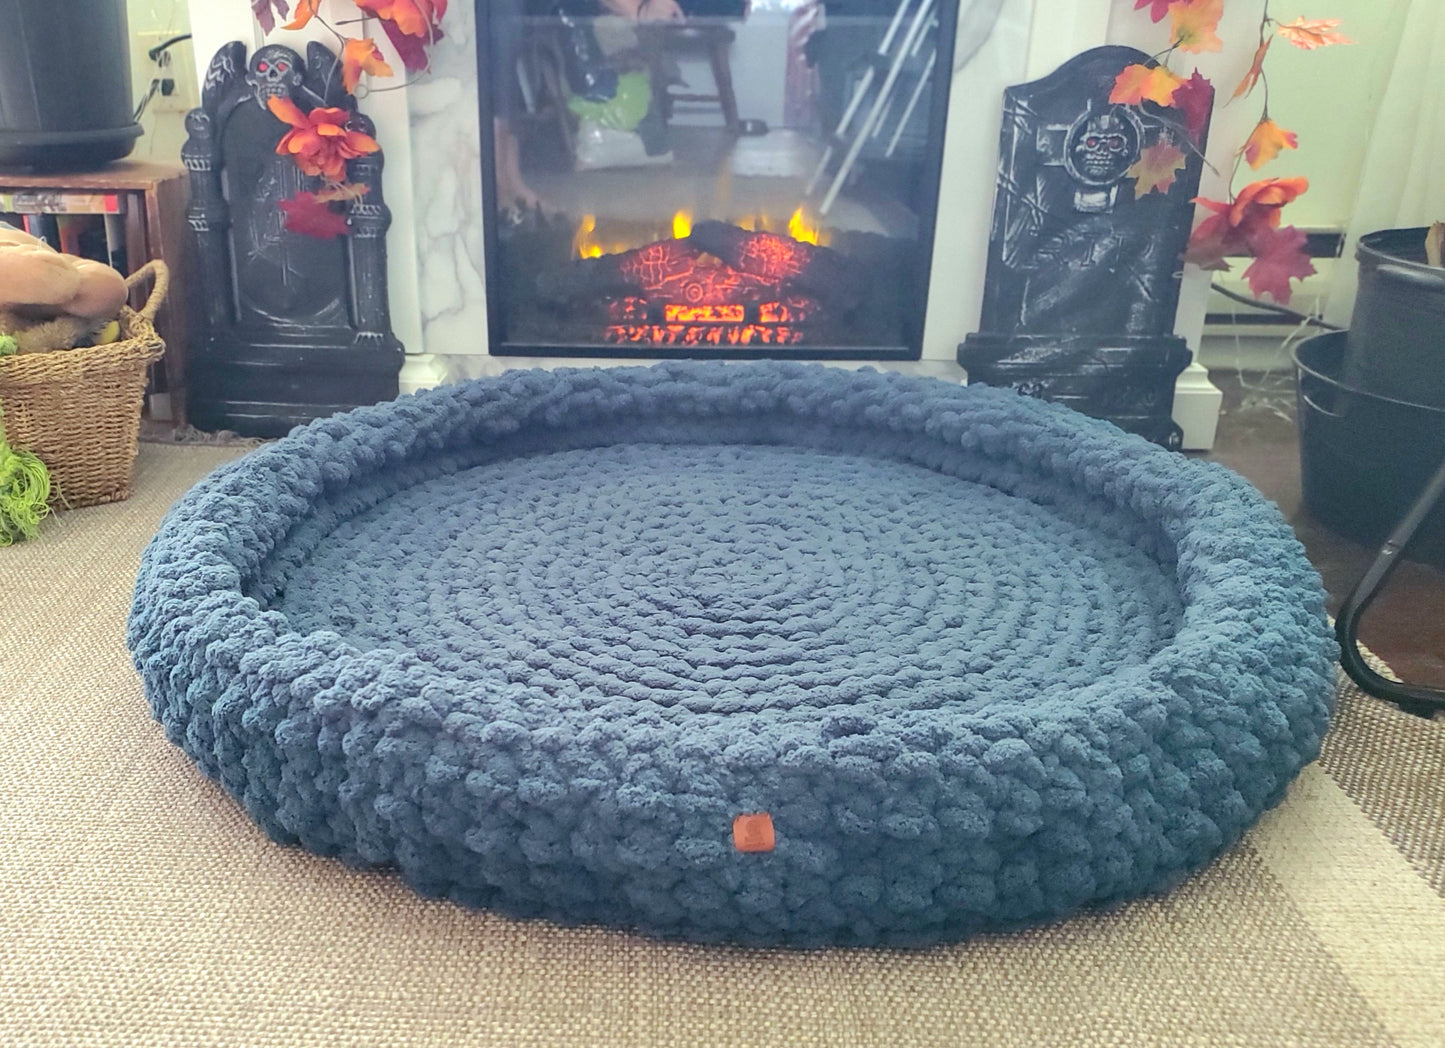 30" Dog Bed | Medium Size Chenille Wool Pet Bed